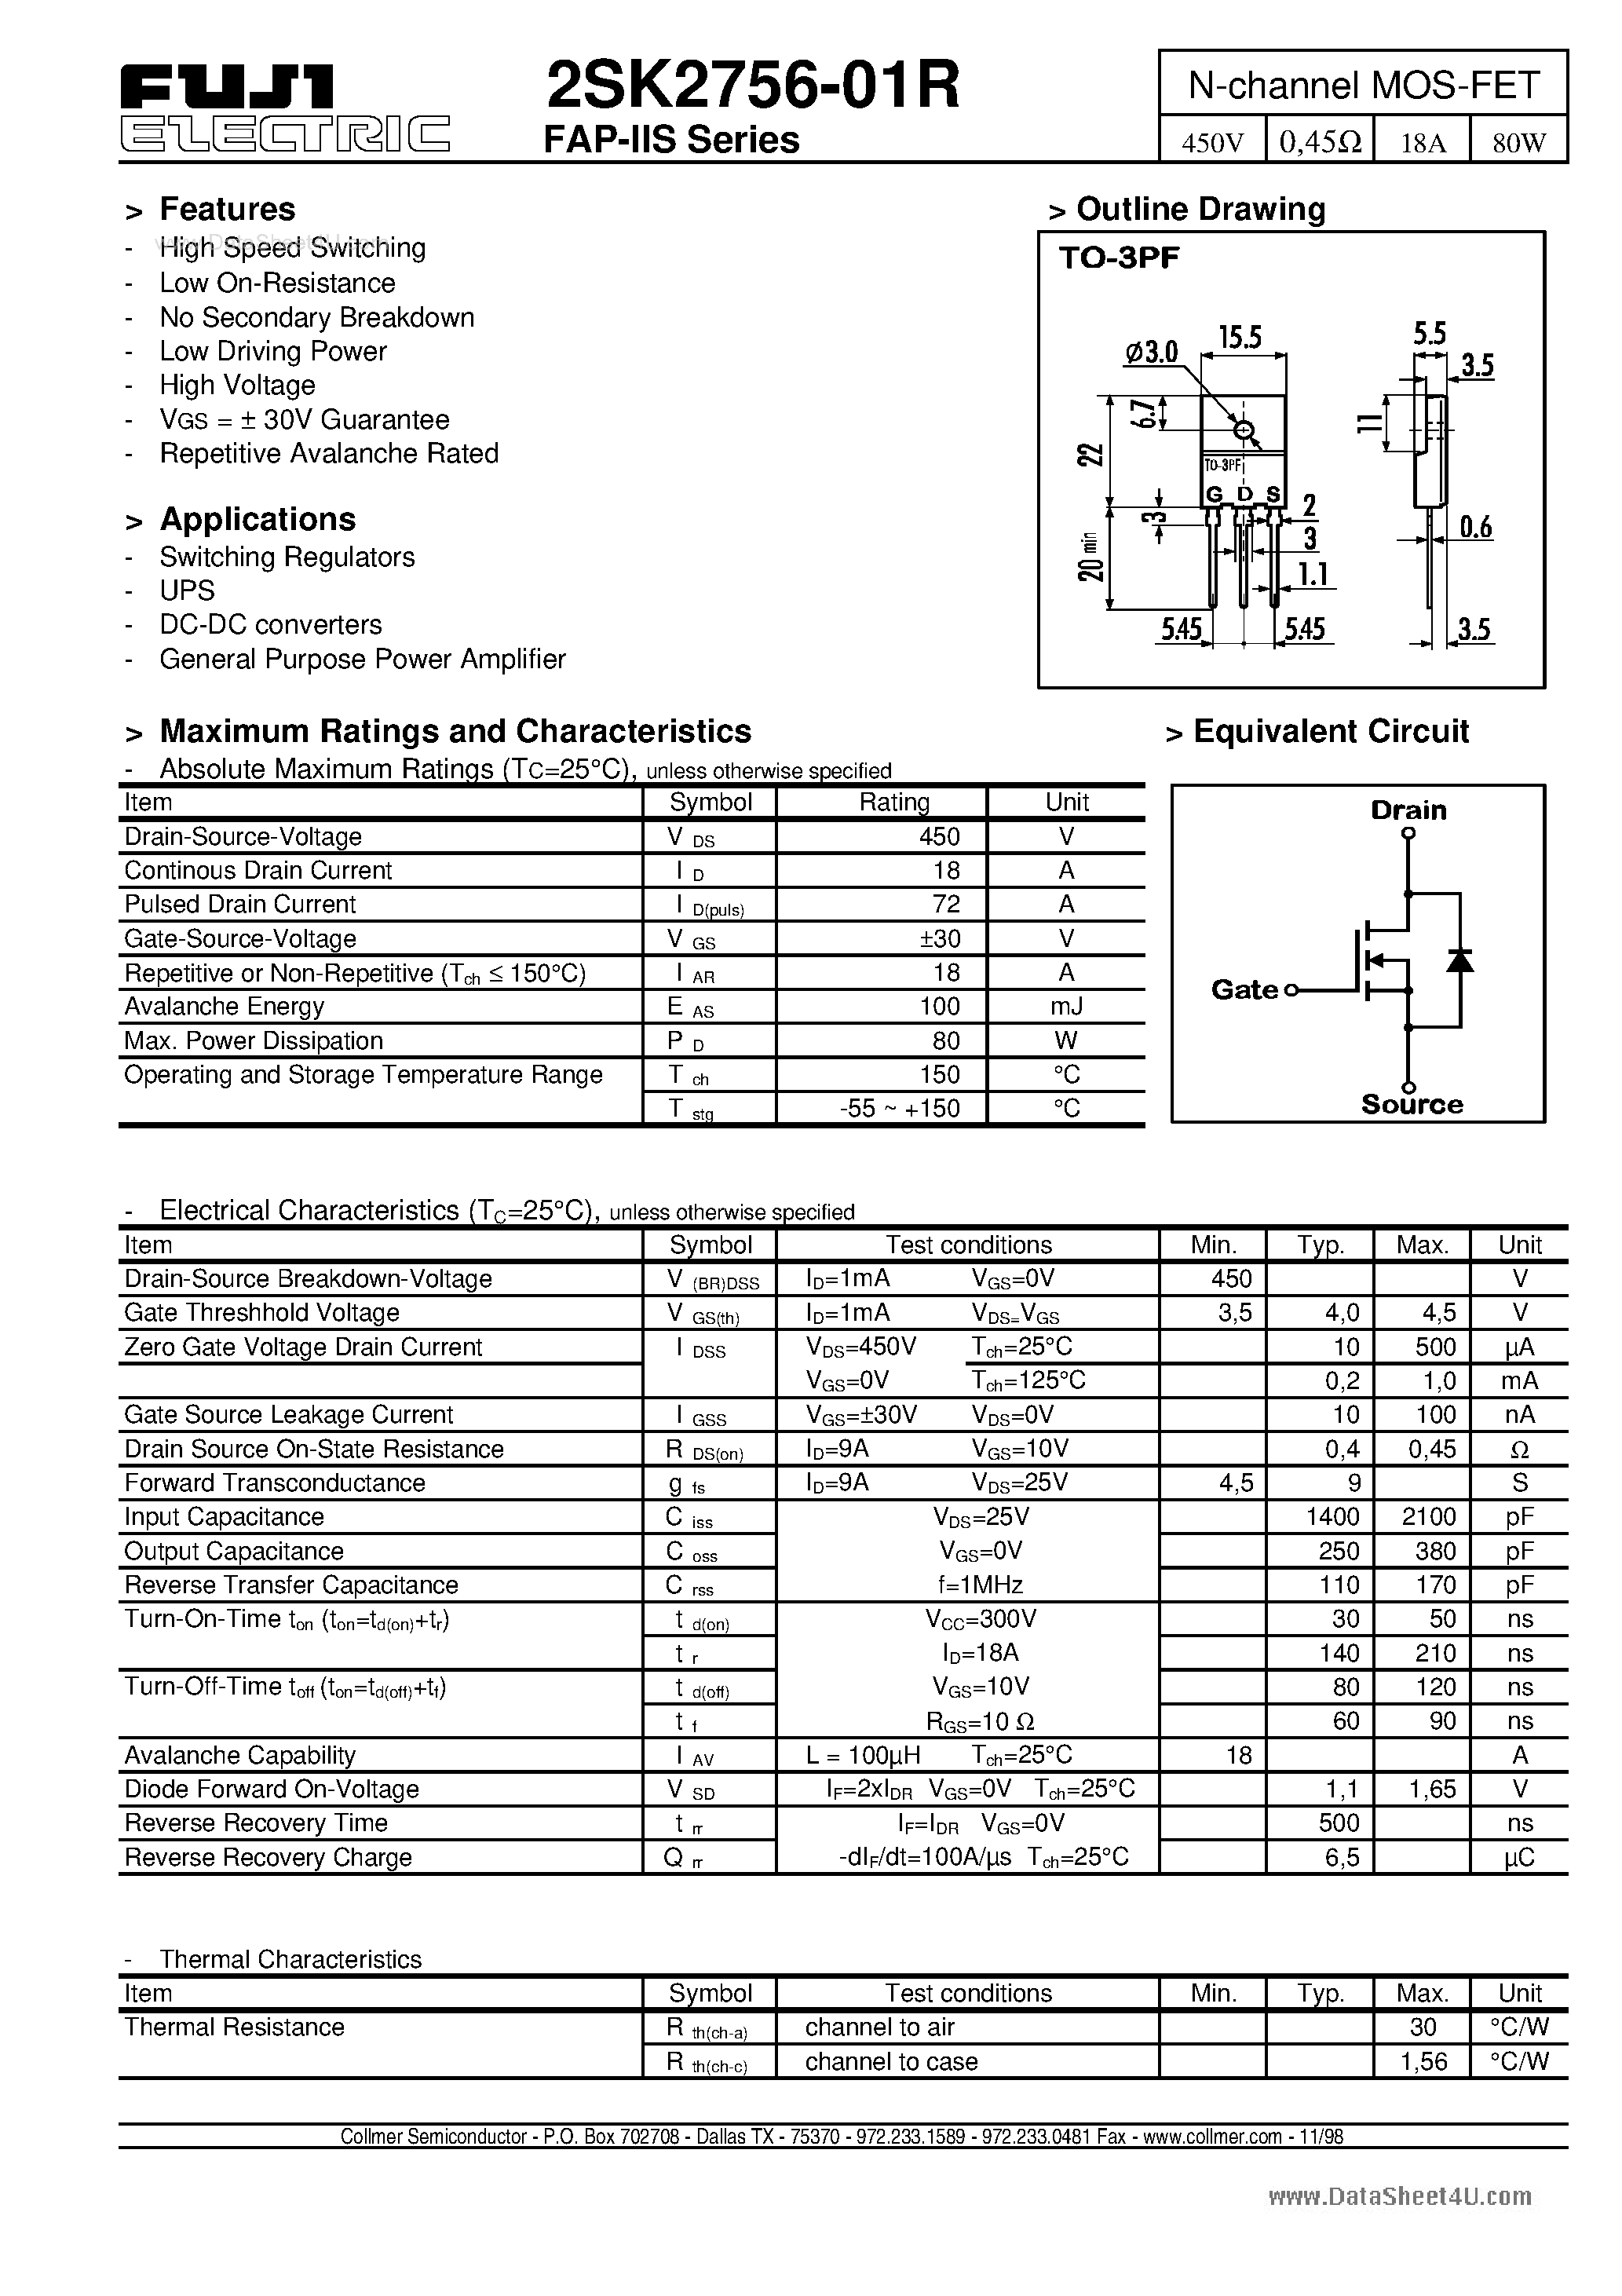 Datasheet K2756-01R - Search -----> 2SK2756-01R page 1